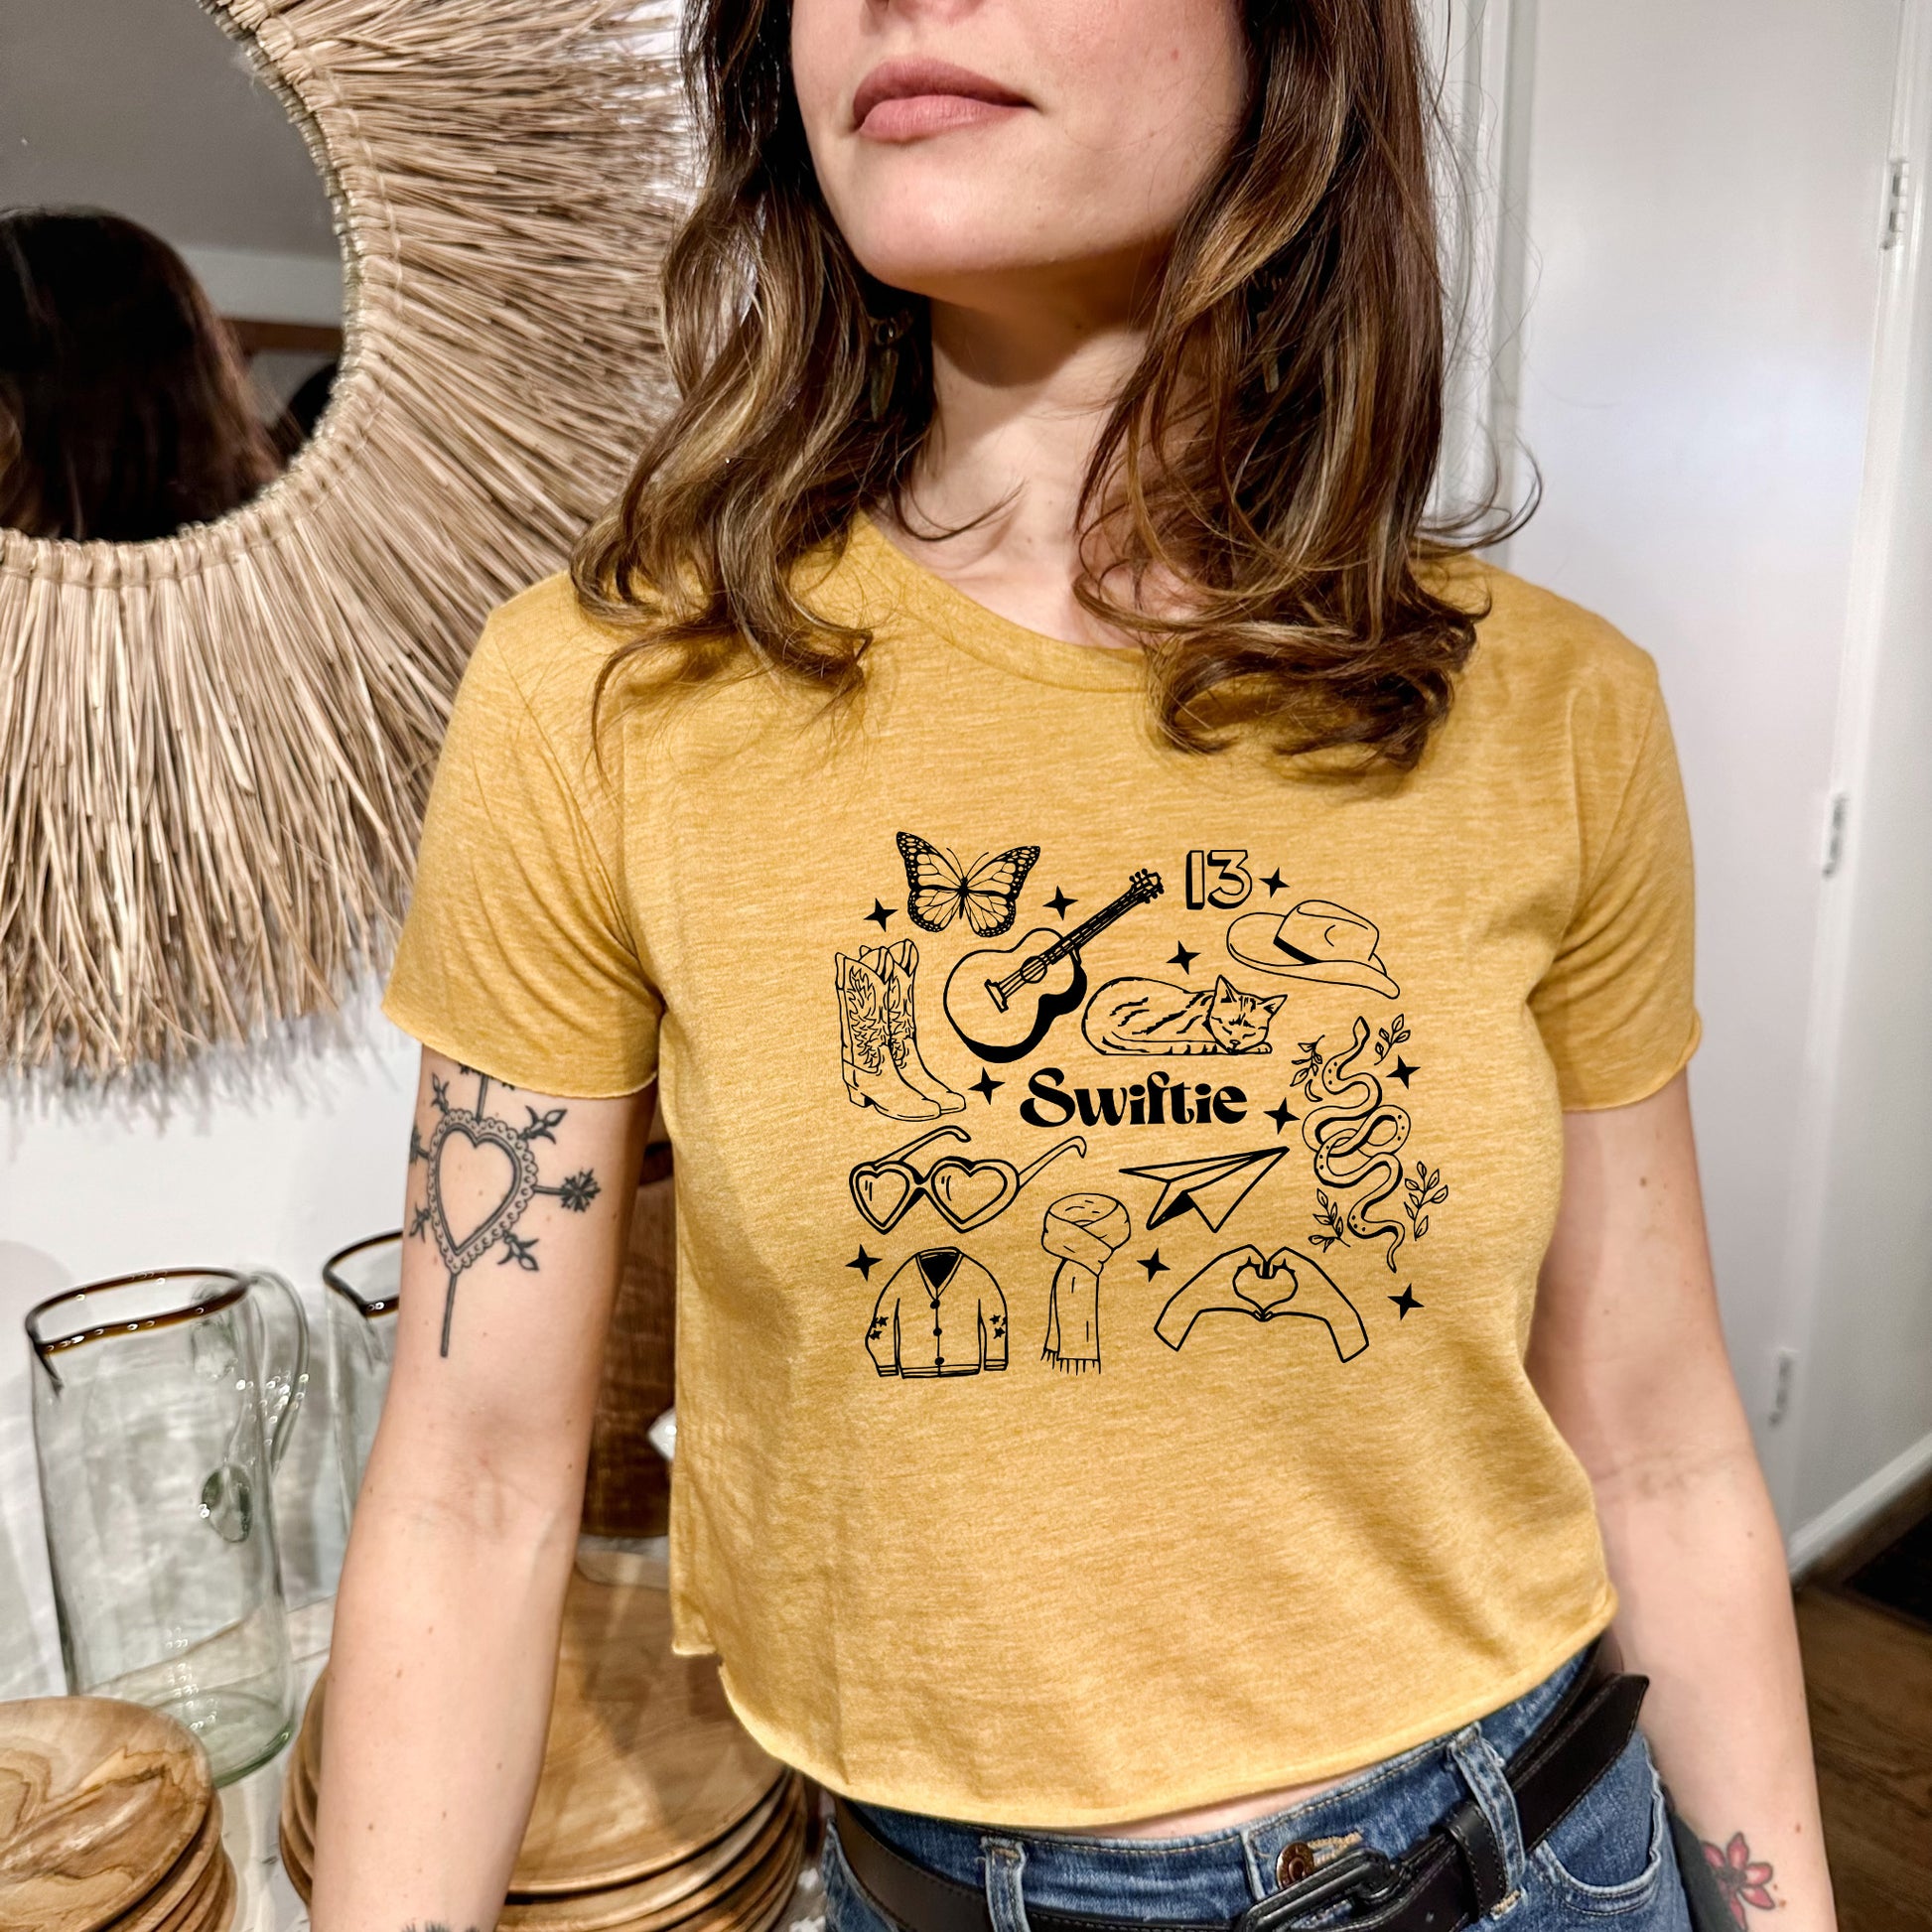 a woman wearing a yellow tshirt standing in front of a mirror